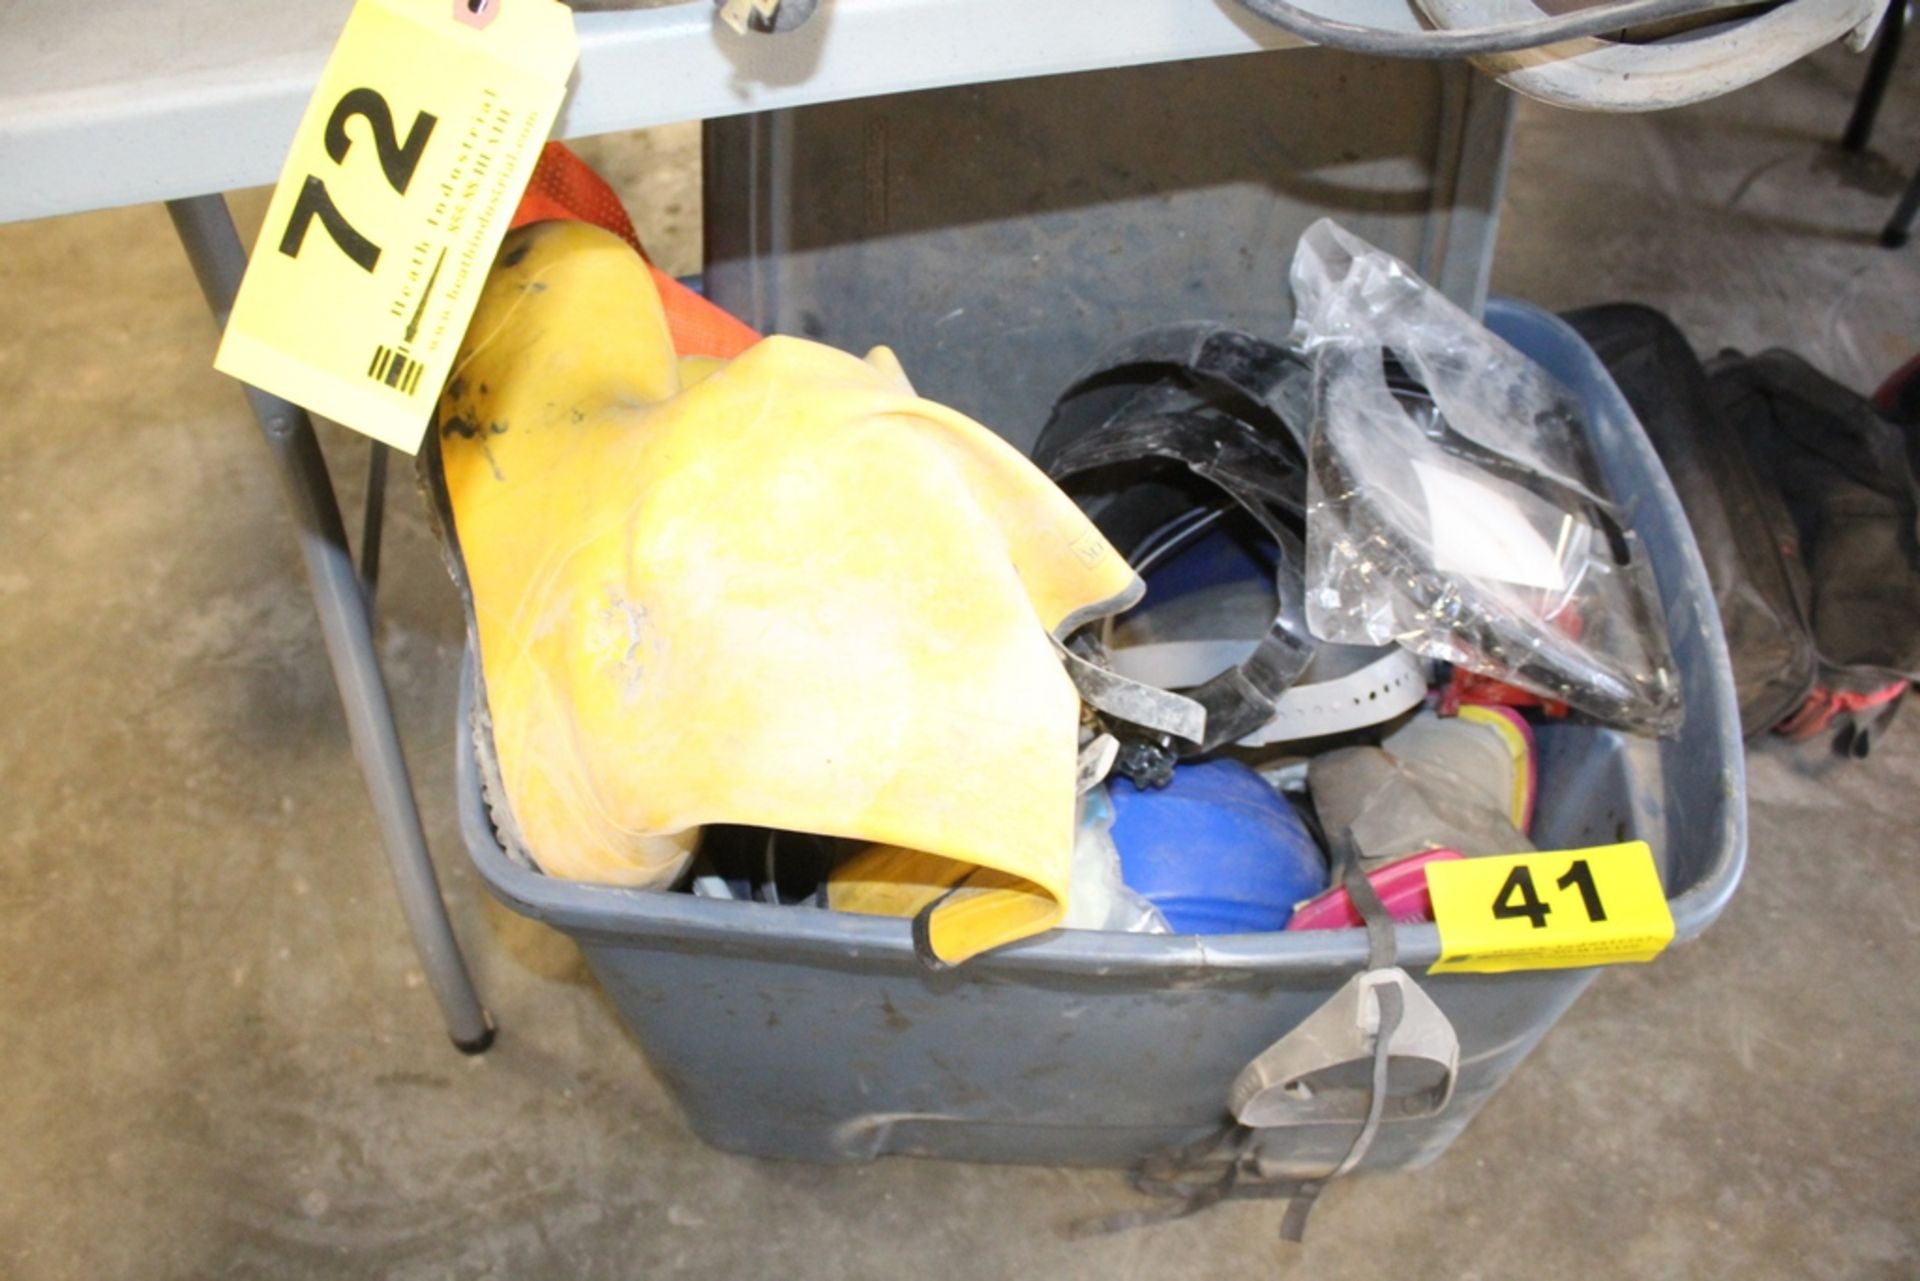 ASSORTED FACE SHIELDS, HARD HATS, AND RUBBER BOOTS